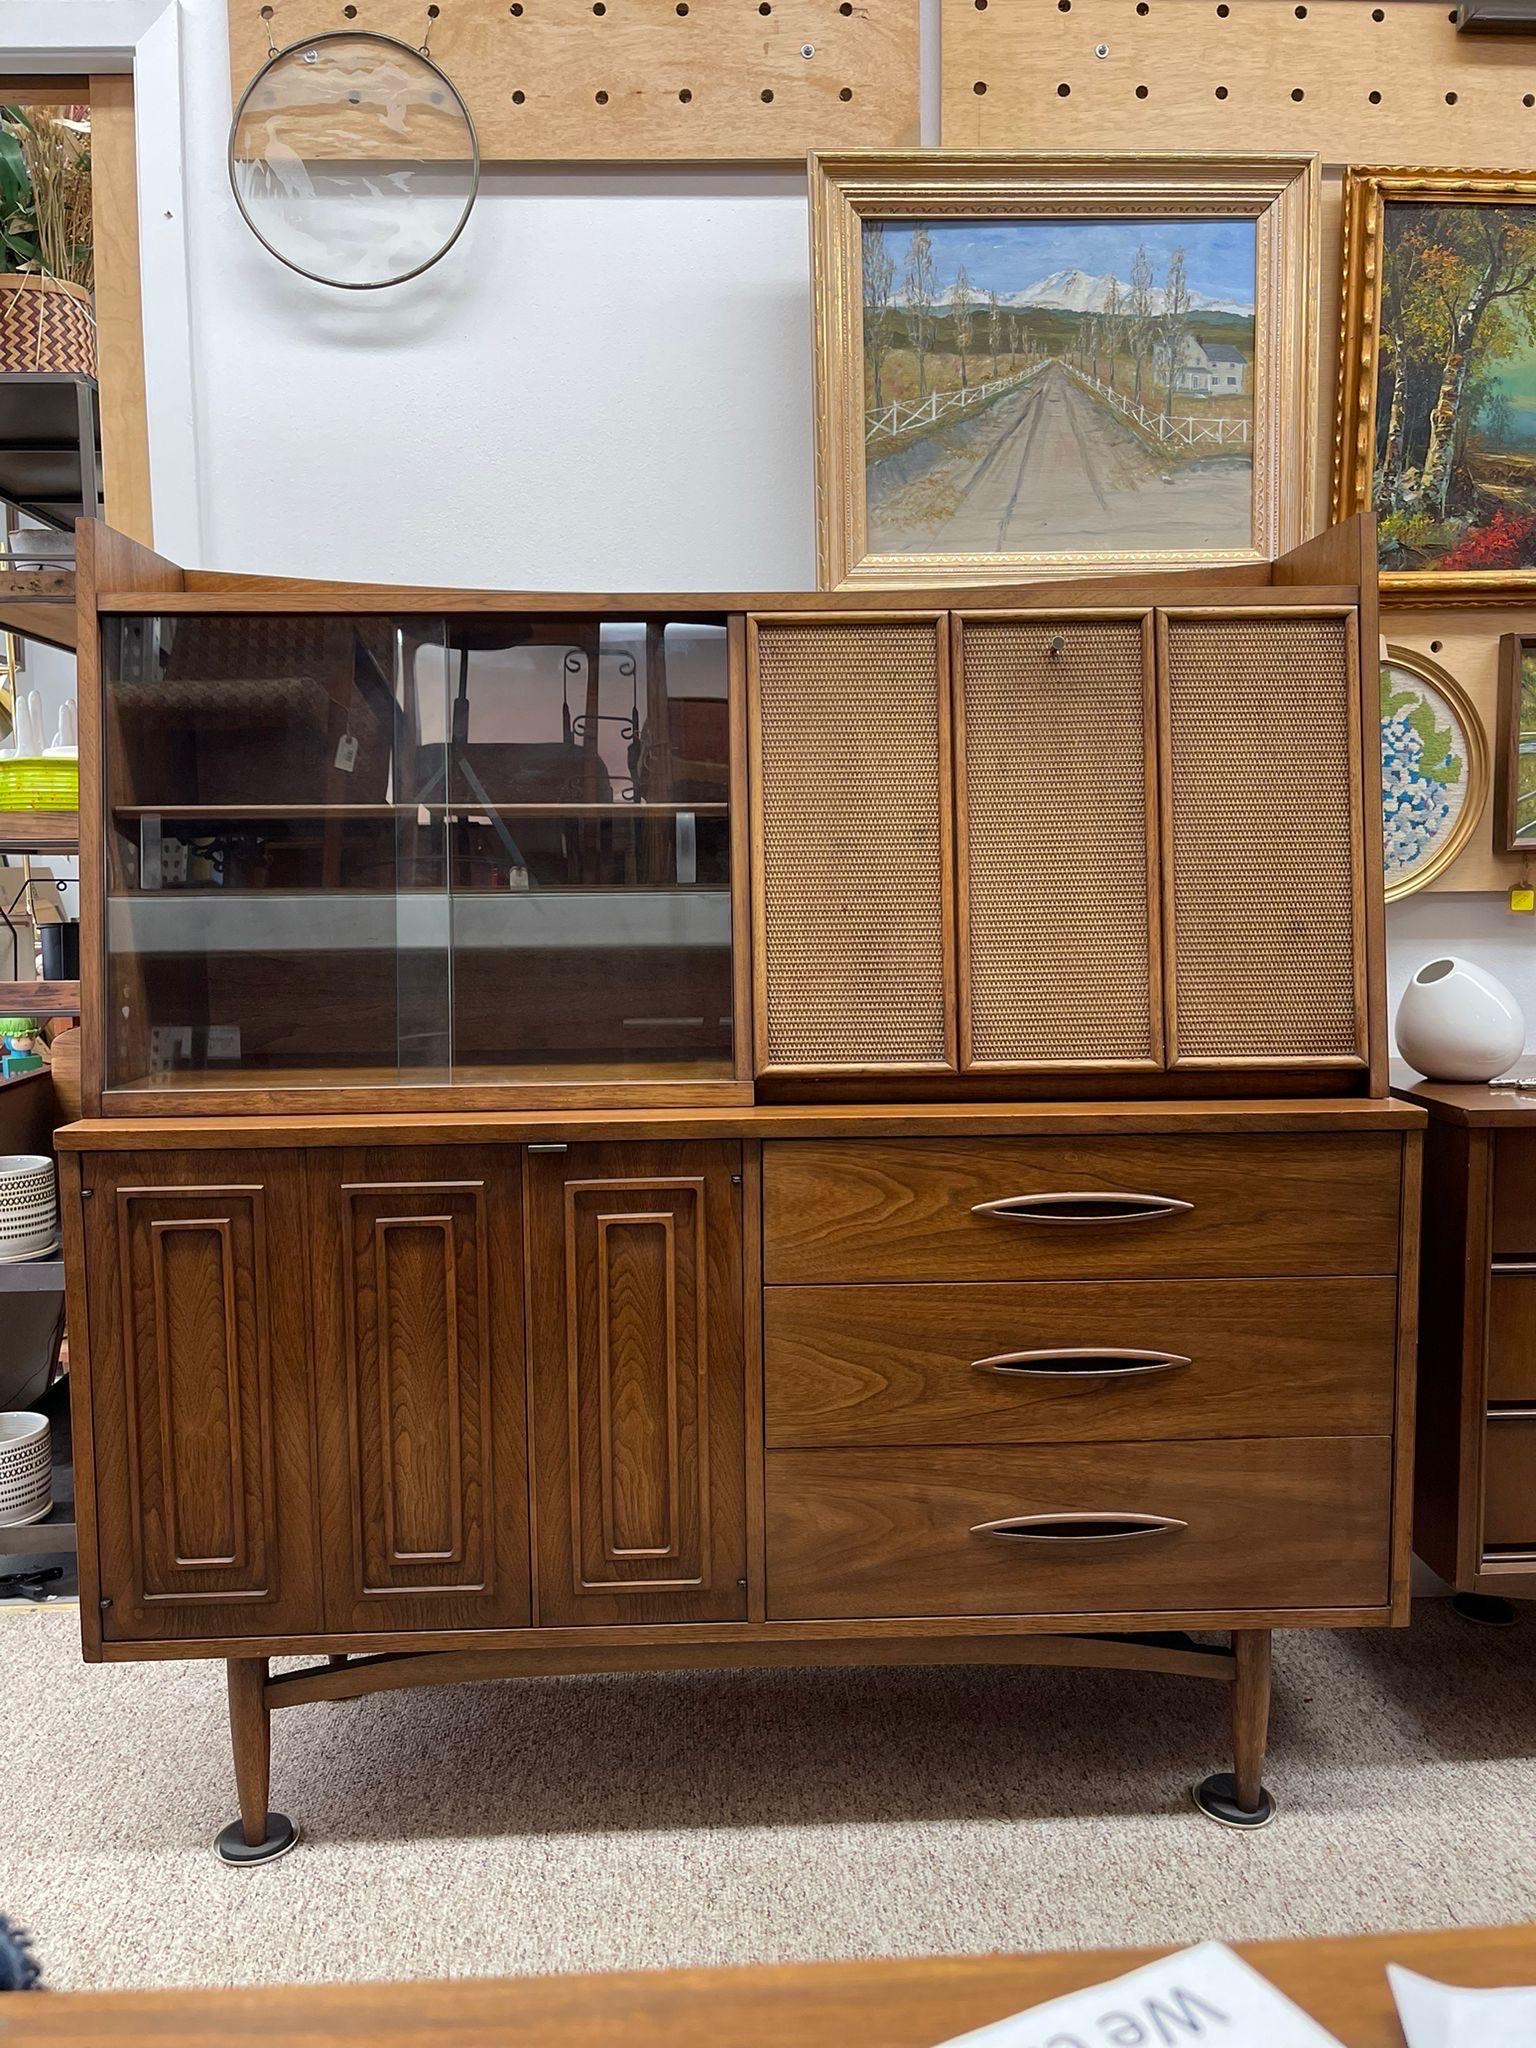 Hutch with Rattan Drop Front Cabinet Space as well as  Glass Front Shelving. The Top of the Piece is Completely Detachable. The Shelving with the Cabinet is Removable and Adjustable. Sculptured Details on Drawer Pulls and Stretcher , Tapered Legs.